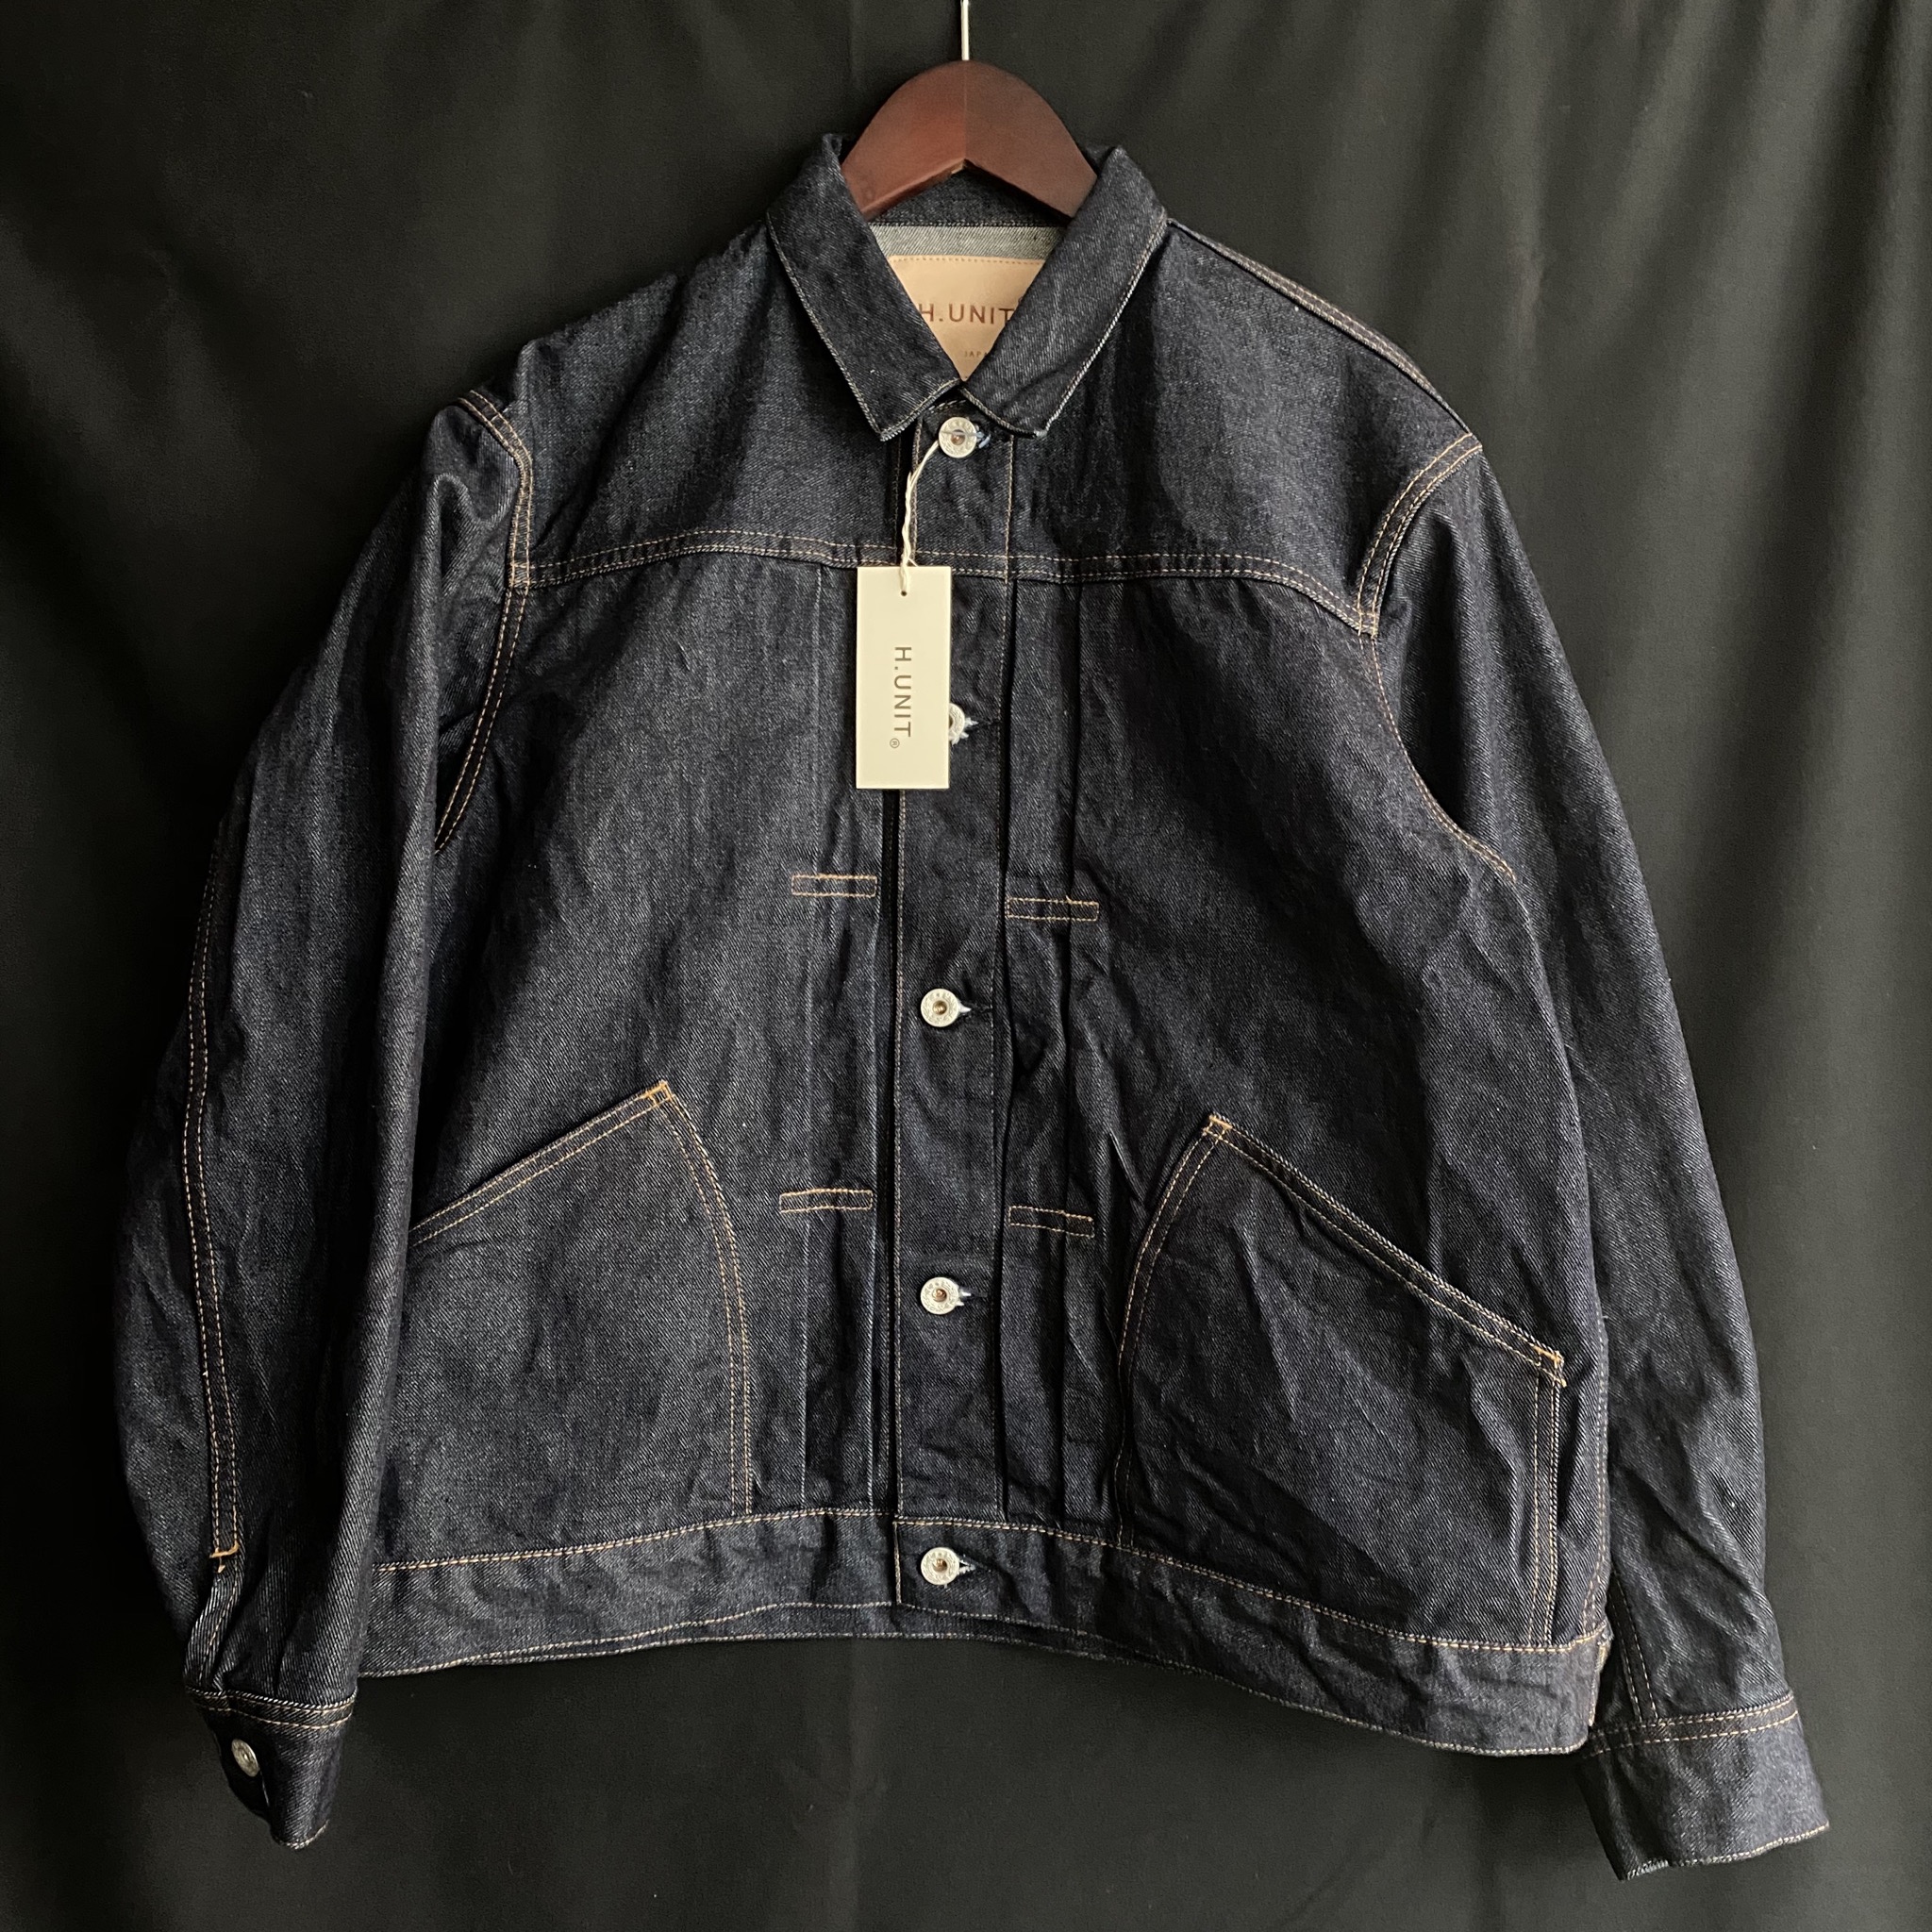 Read more about the article 【H.UNIT】魅惑のDENIM JACKETが入荷したのです。